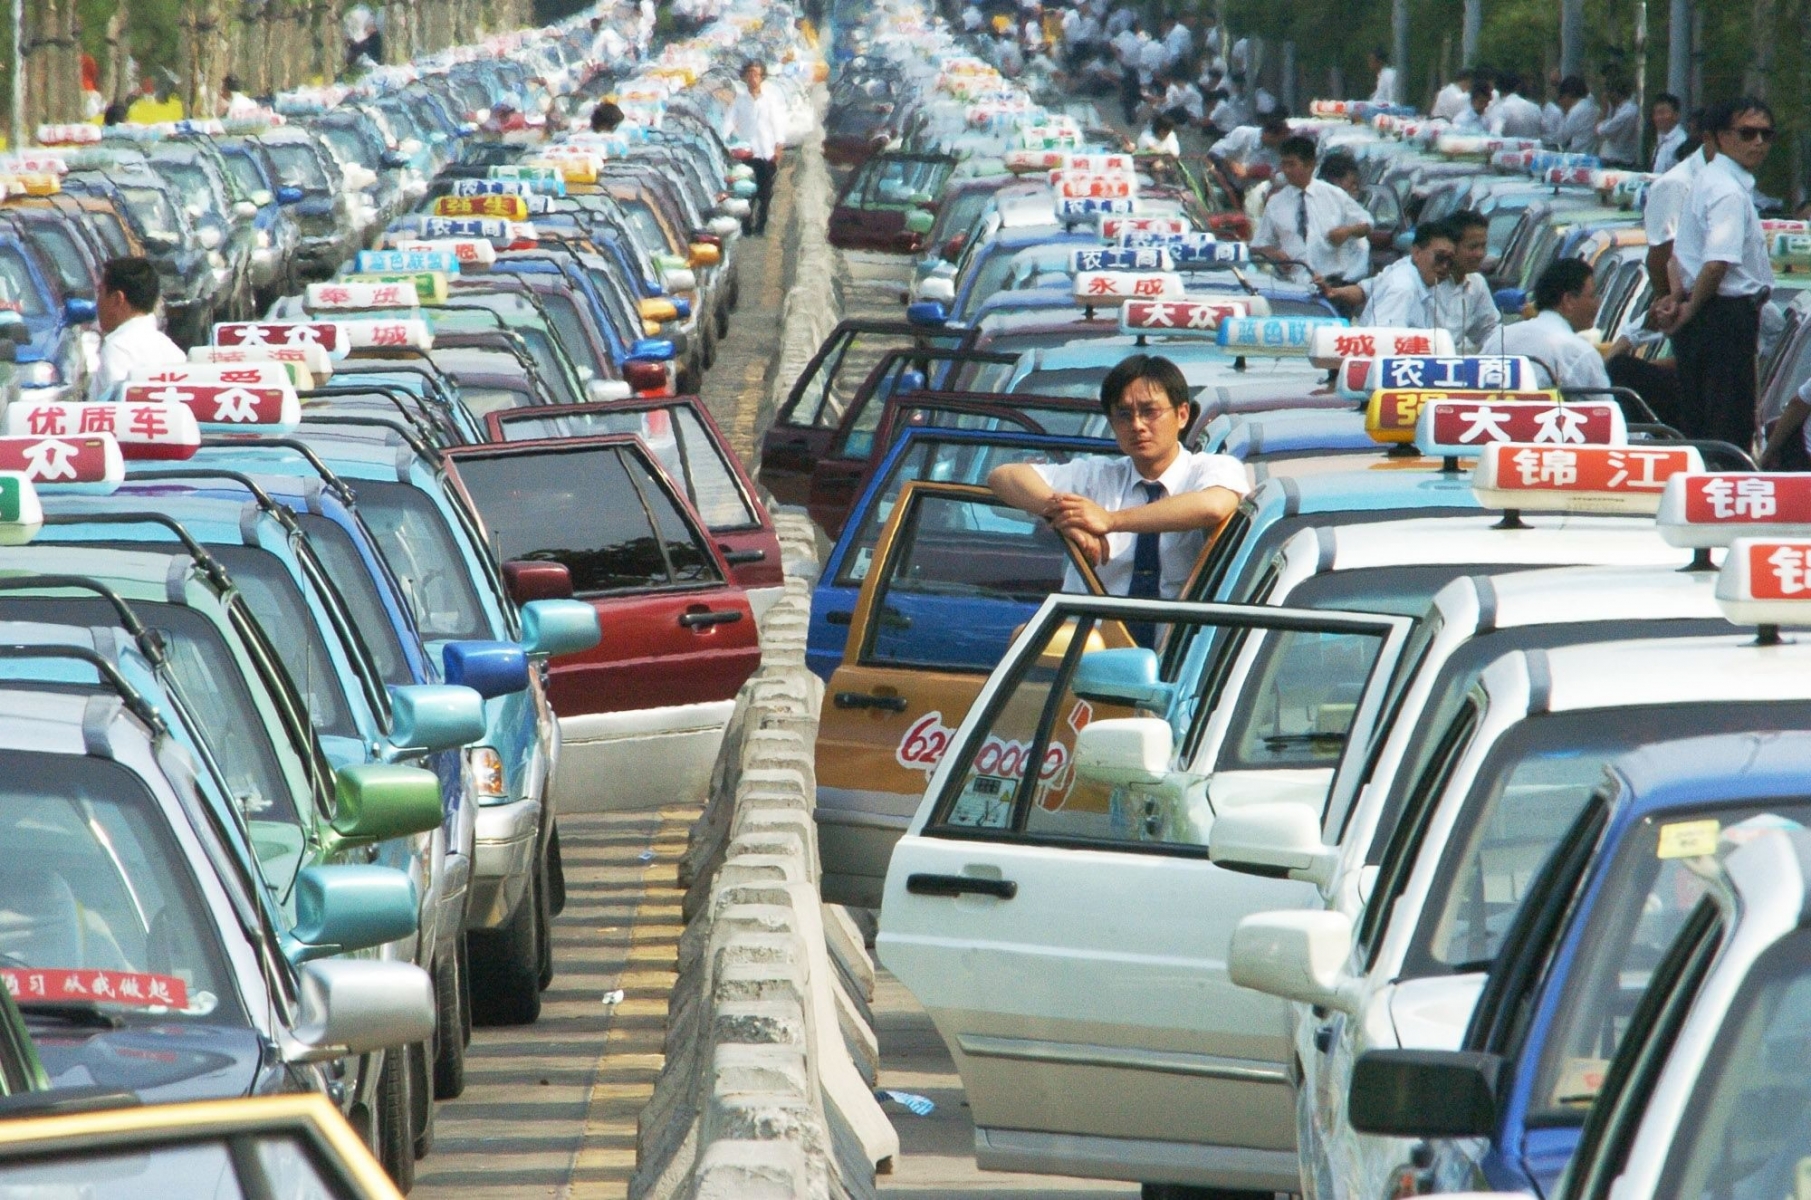 Taxis wait in lines for customers outside the Pudong International Airport in Shanghai, east China, Wednesday, June 15, 2005. About 2,500 cabs wait there everyday because the airport is 50 kilometers (30 miles) away from downtown Shanghai and the drivers will suffer a loss if they don't take a customer back to the city. Drivers often have to wait for five hours before reaching the front of the line to pick up a customer at the airport. (AP Photo) **ONLINE OUT, CHINA OUT ** CHINA TAX QUEUE